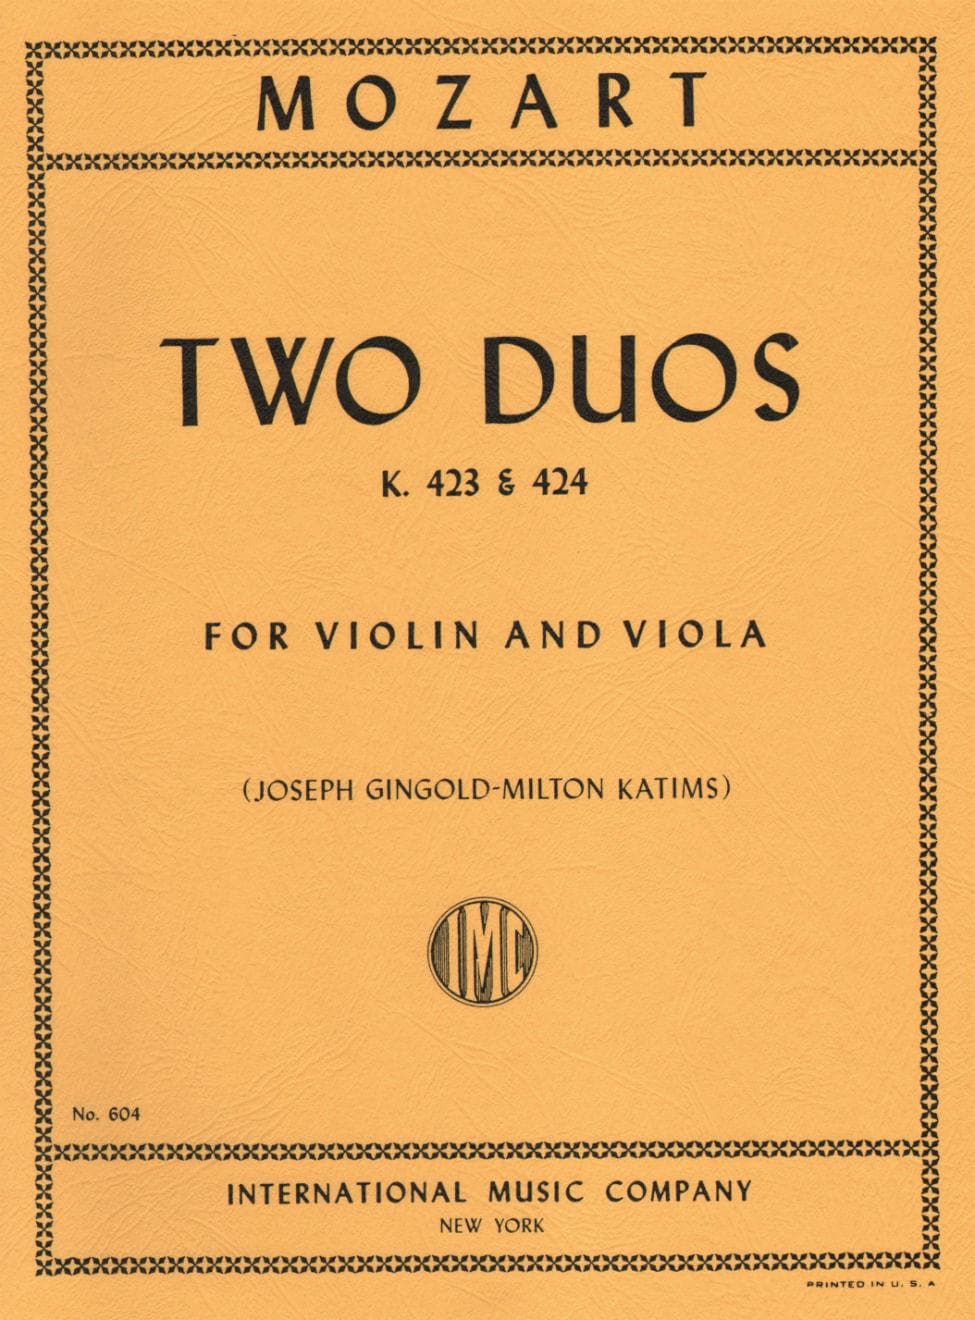 Mozart, WA - Two Duos, K 423 and 424 - Violin and Viola - edited by Josef Gingold and Milton Katims - International Music Co